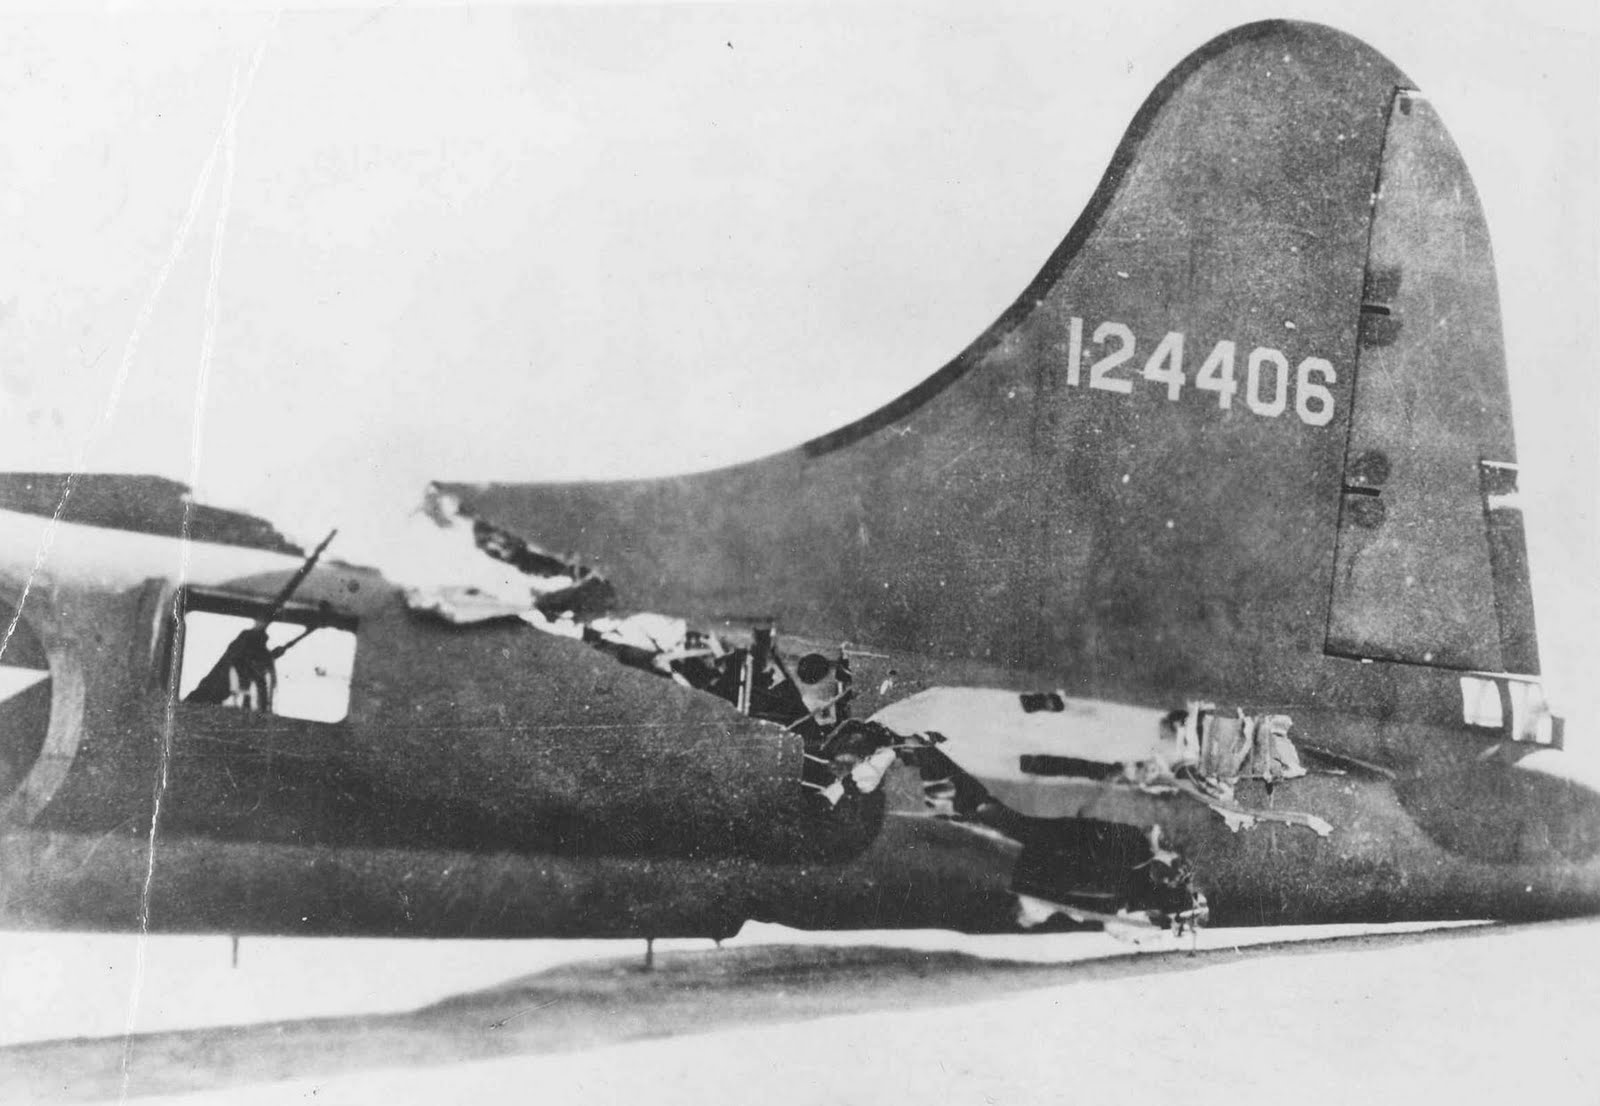 Under His Wings: The B-17 Flying Fortress, Part 2 - Crew